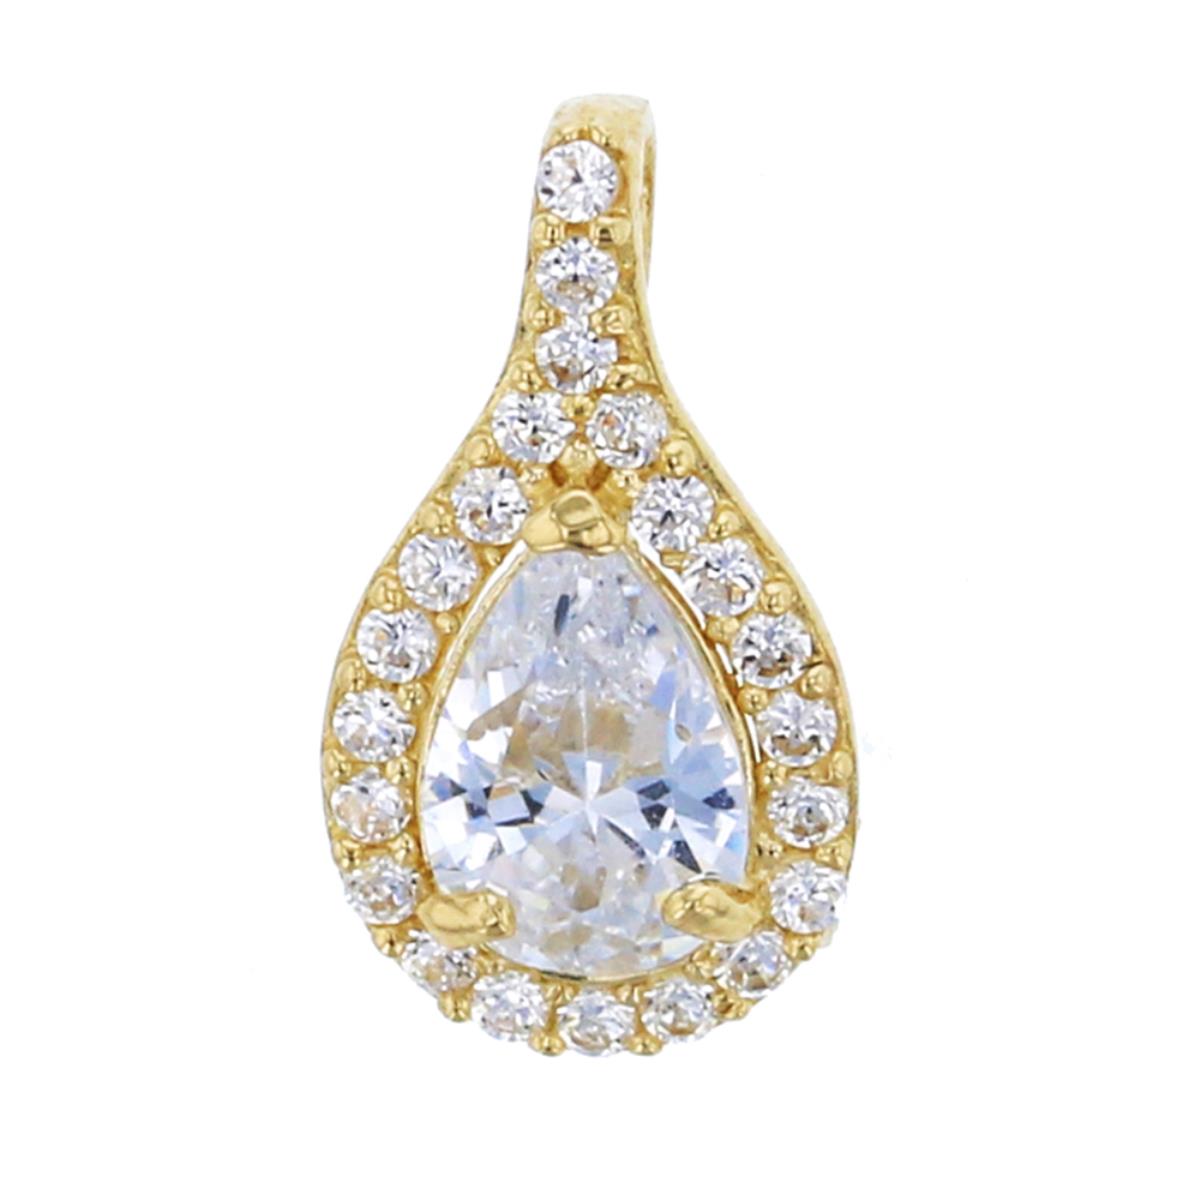 10K Yellow Gold Micropave 6x4mm Pear Cut CZ Halo Pendant